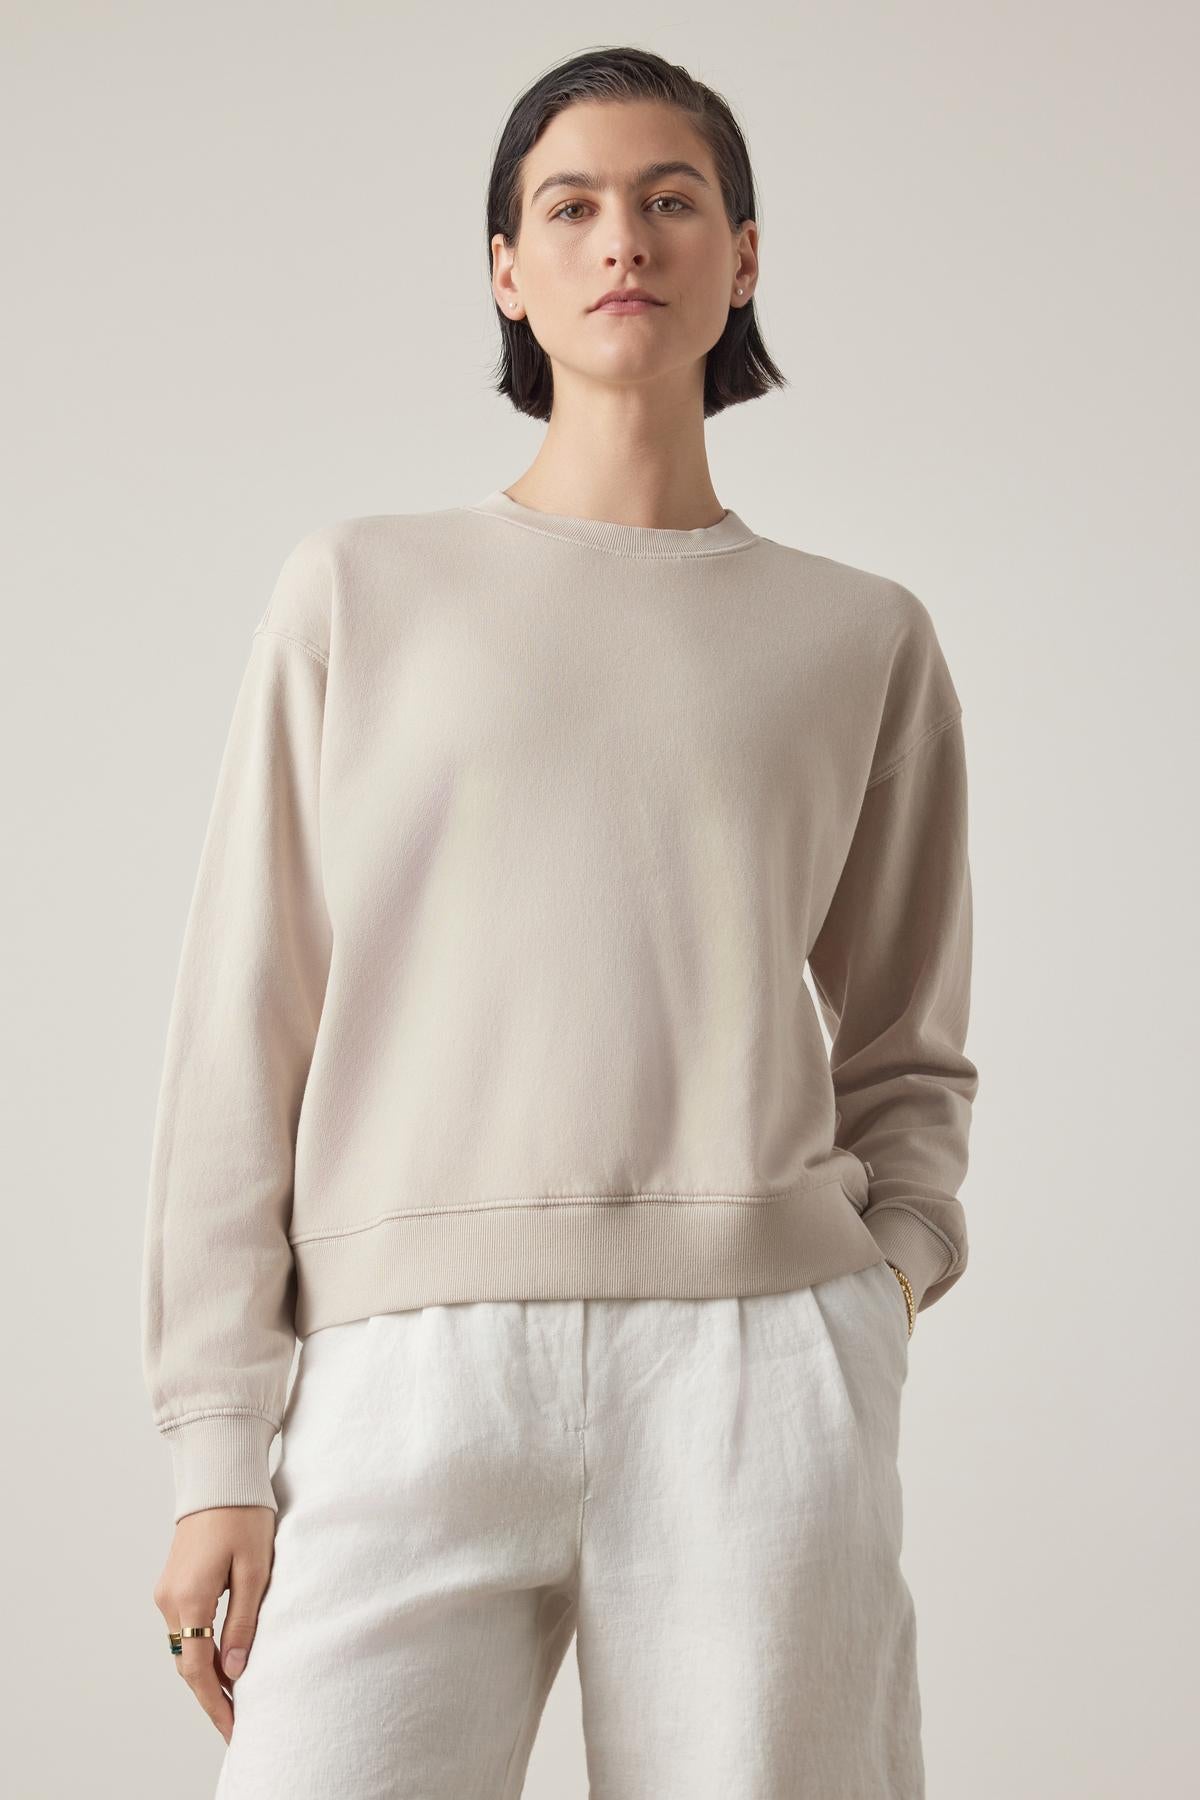 Woman in a Velvet by Jenny Graham Ynez Sweatshirt and white pants standing against a plain background, looking directly at the camera.-36863307612353